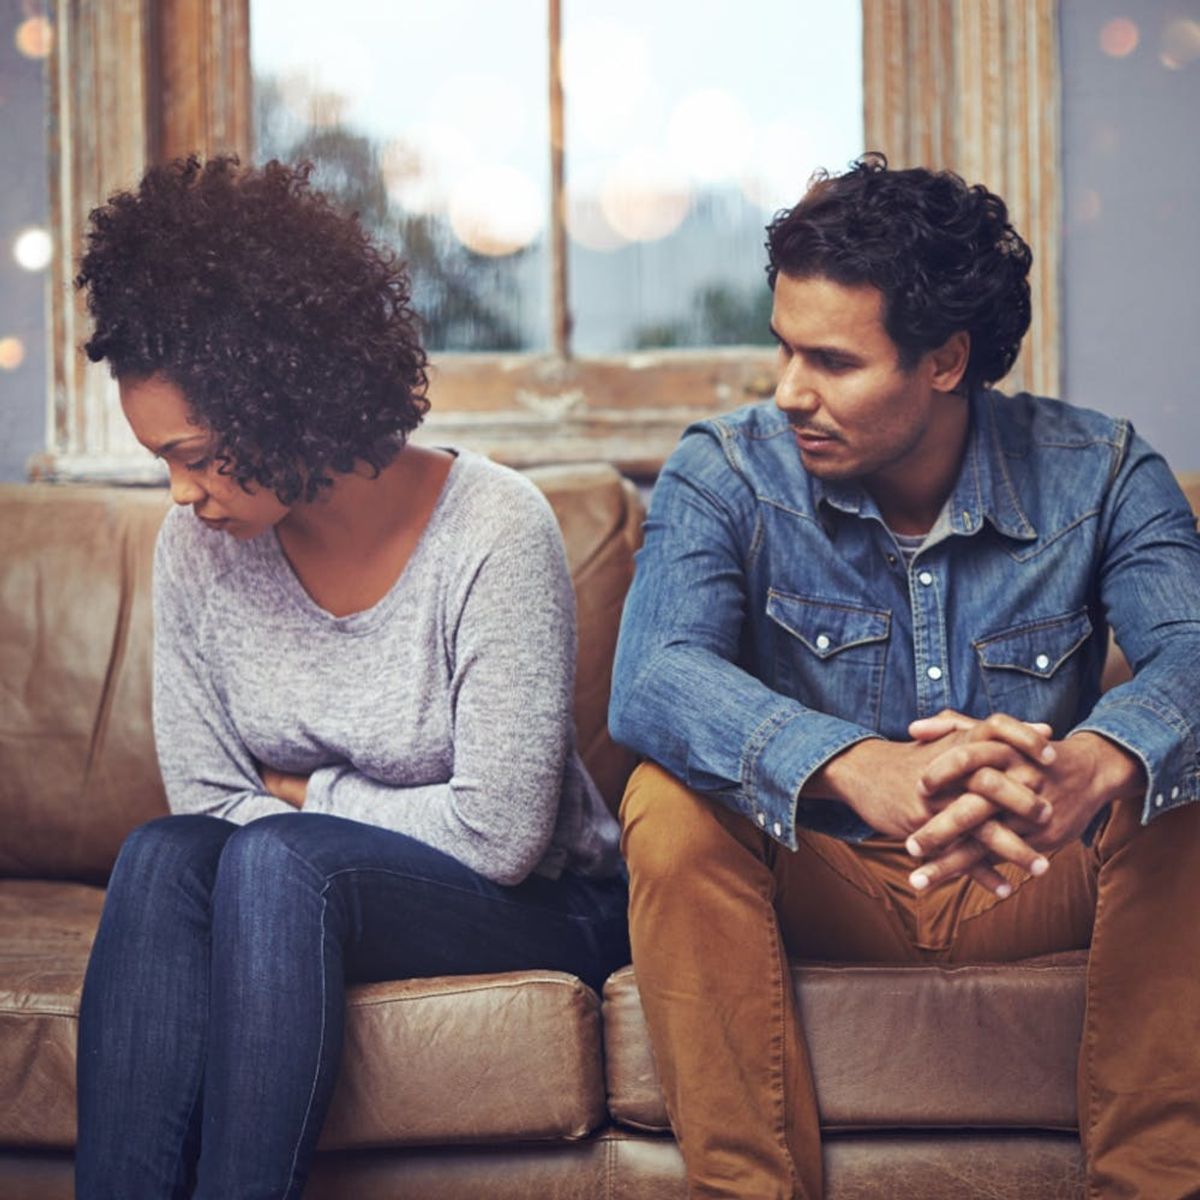 7 Signs Your Relationship Might Not Be As Healthy As You Think